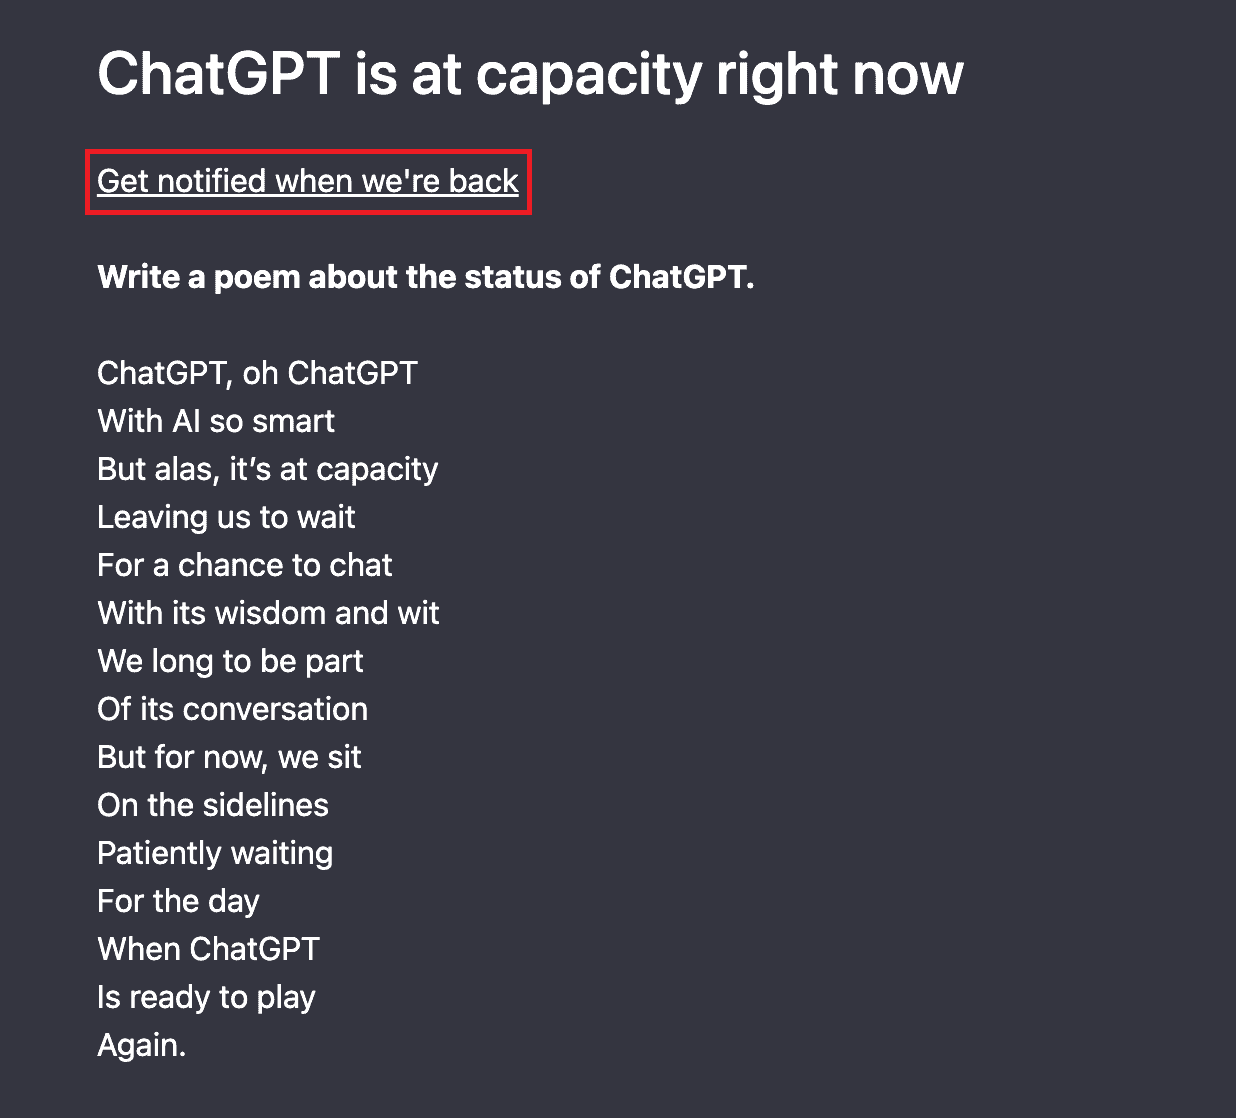 Get notified when we're back option in ChatGPT